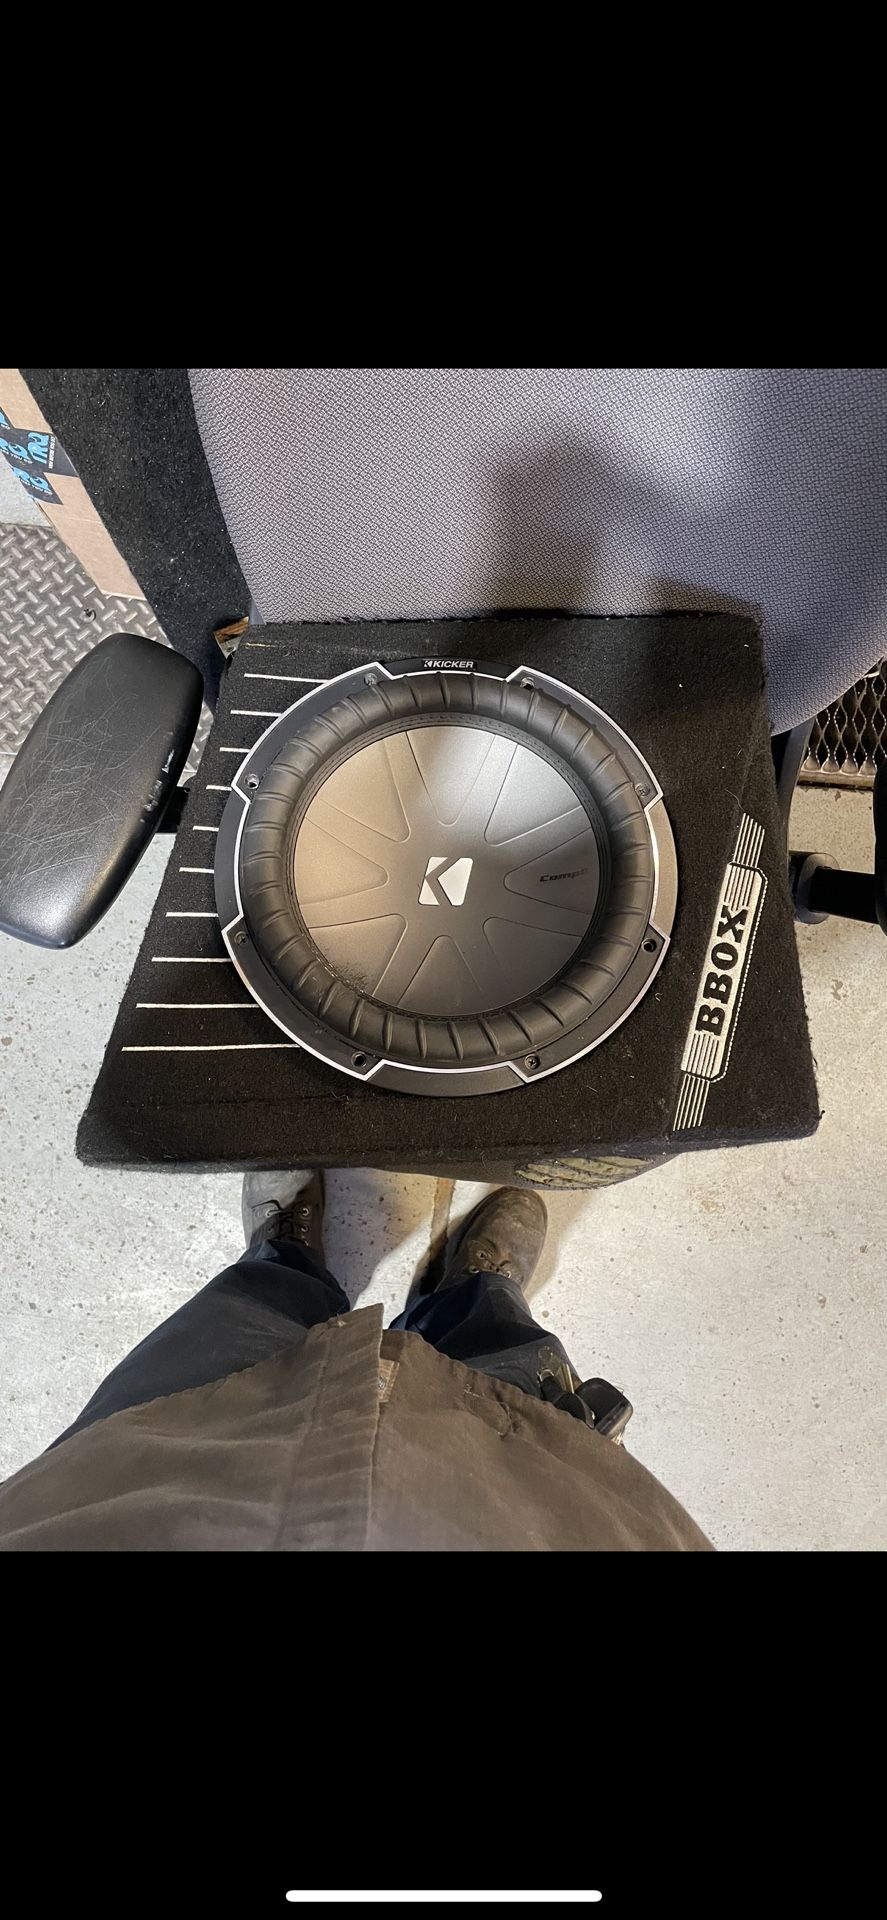 12” Kicker Comp Q (Subwoofer only) (WILL TRADE FOR A DOUBLE DIN RADIO WITH APPLY CARP PLAY)